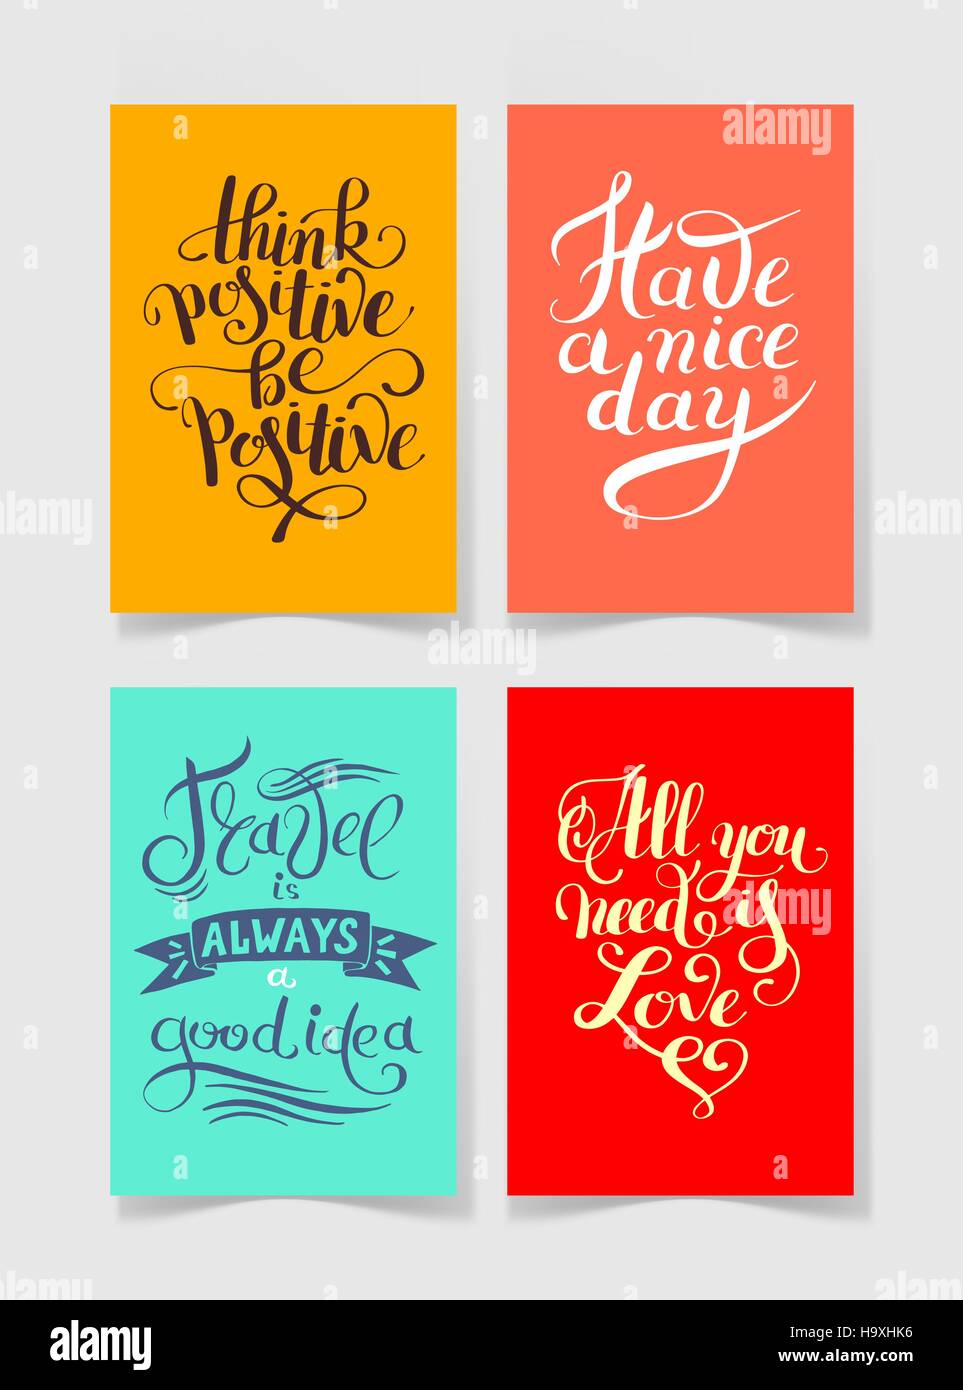 Positive thinking vintage Stock Vector Images - Page 3 - Alamy